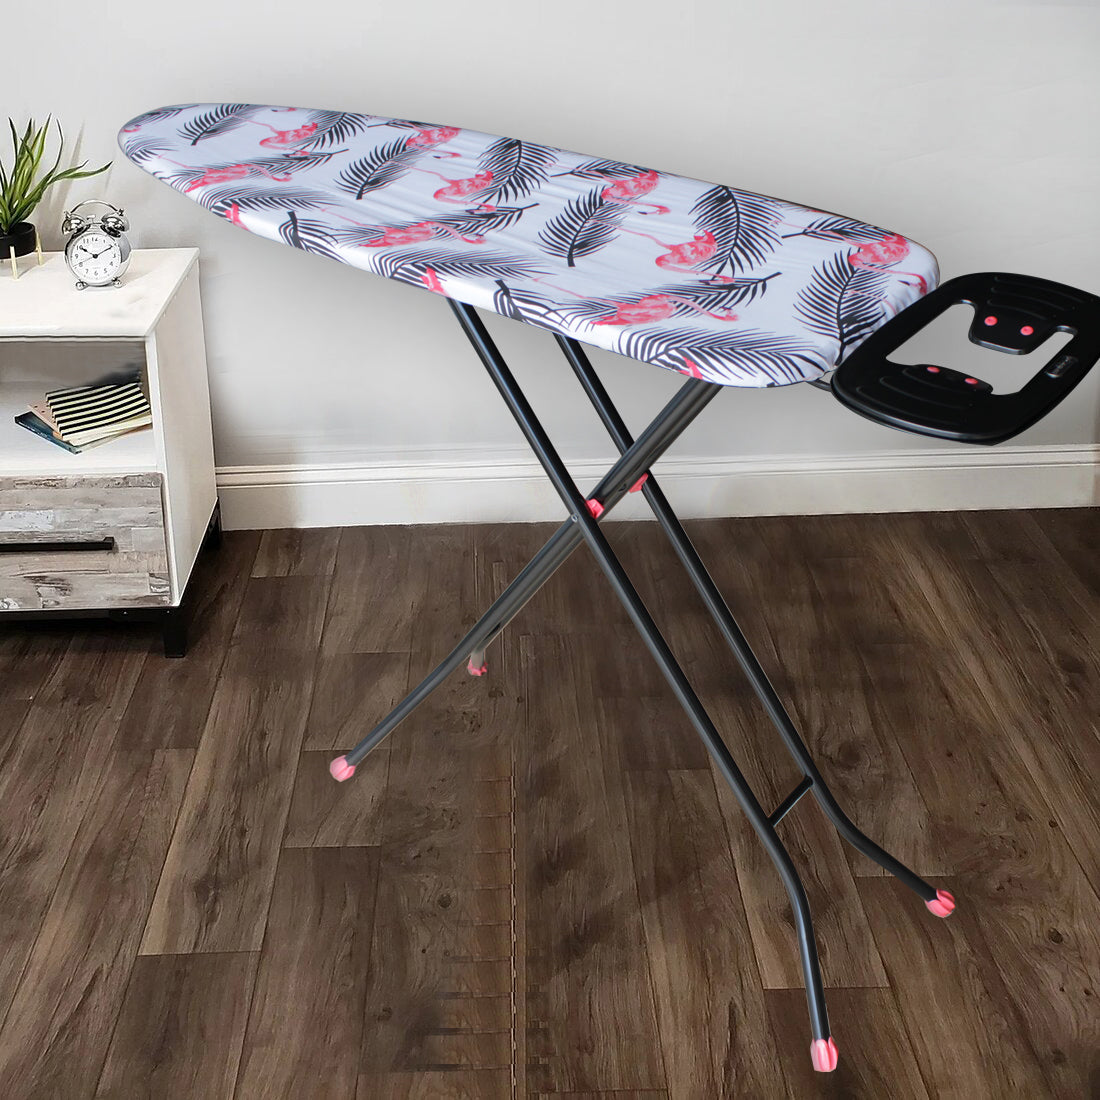 110x33cm Mesh Ironing Board with Safety Iron Rest - Pink Flamingo